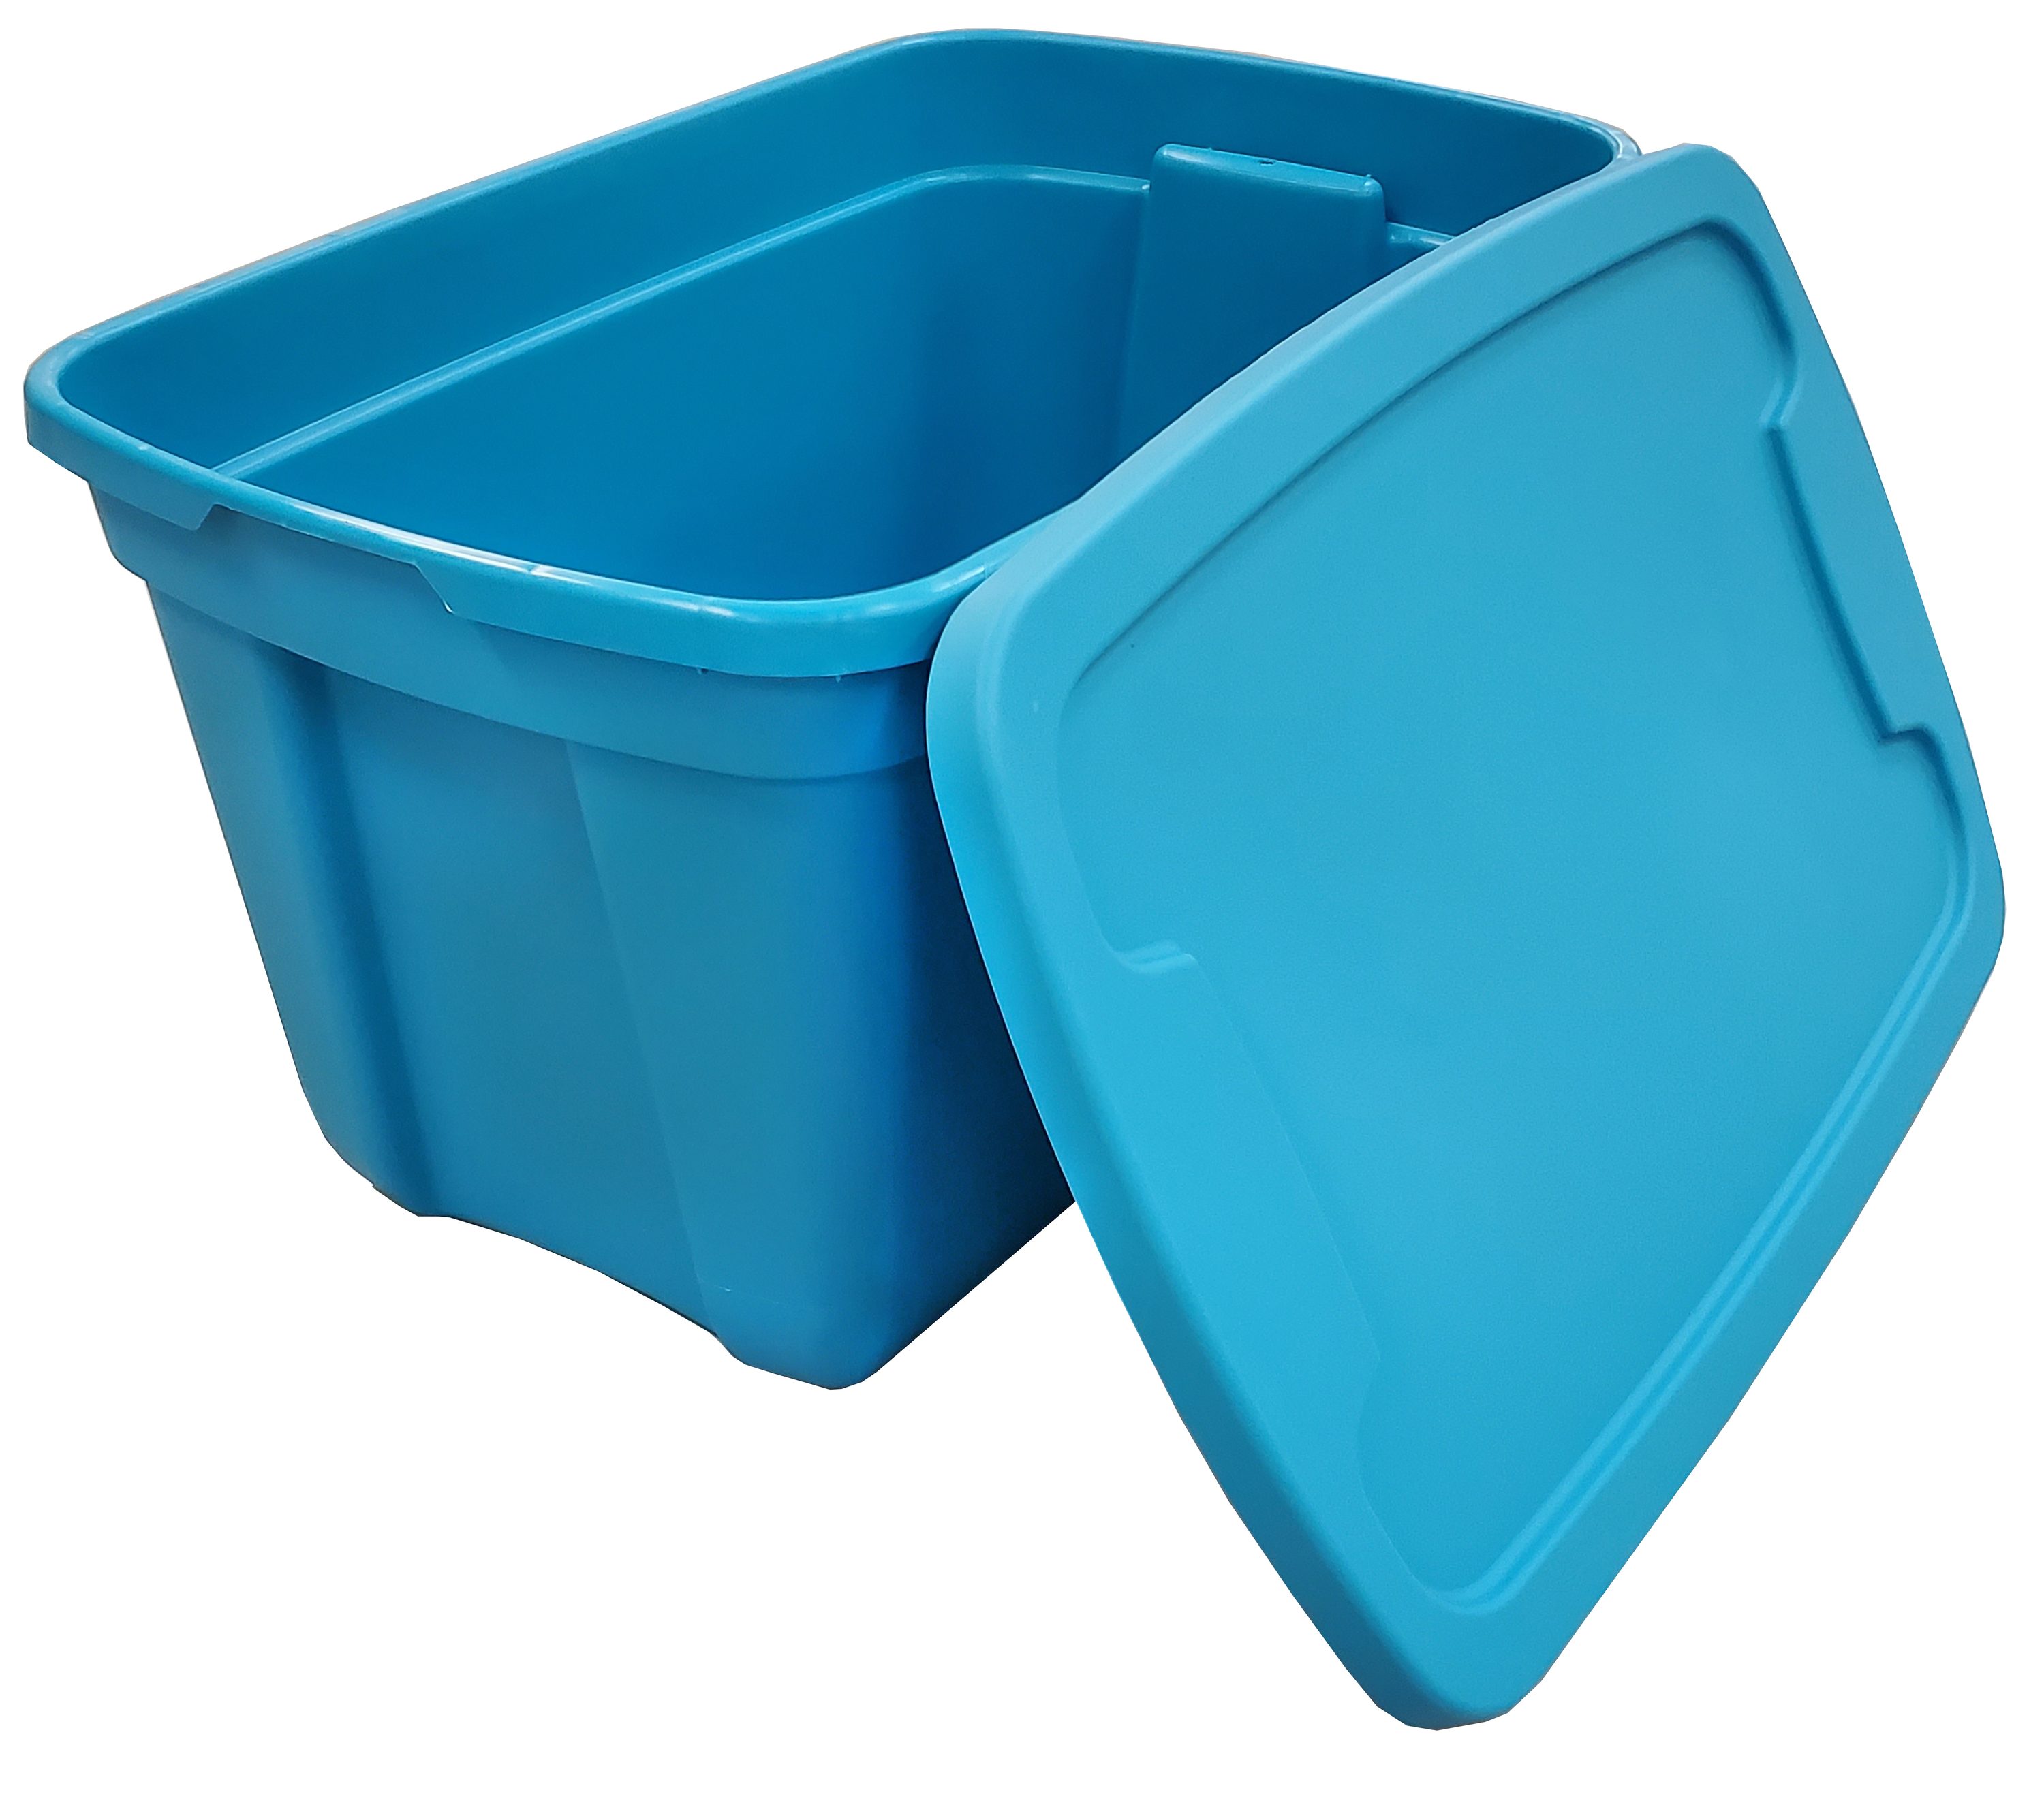 Centrex Rugged Tote Large 31-Gallons (124-Quart) Metallic Blue Heavy Duty  Tote with Standard Snap Lid in the Plastic Storage Containers department at